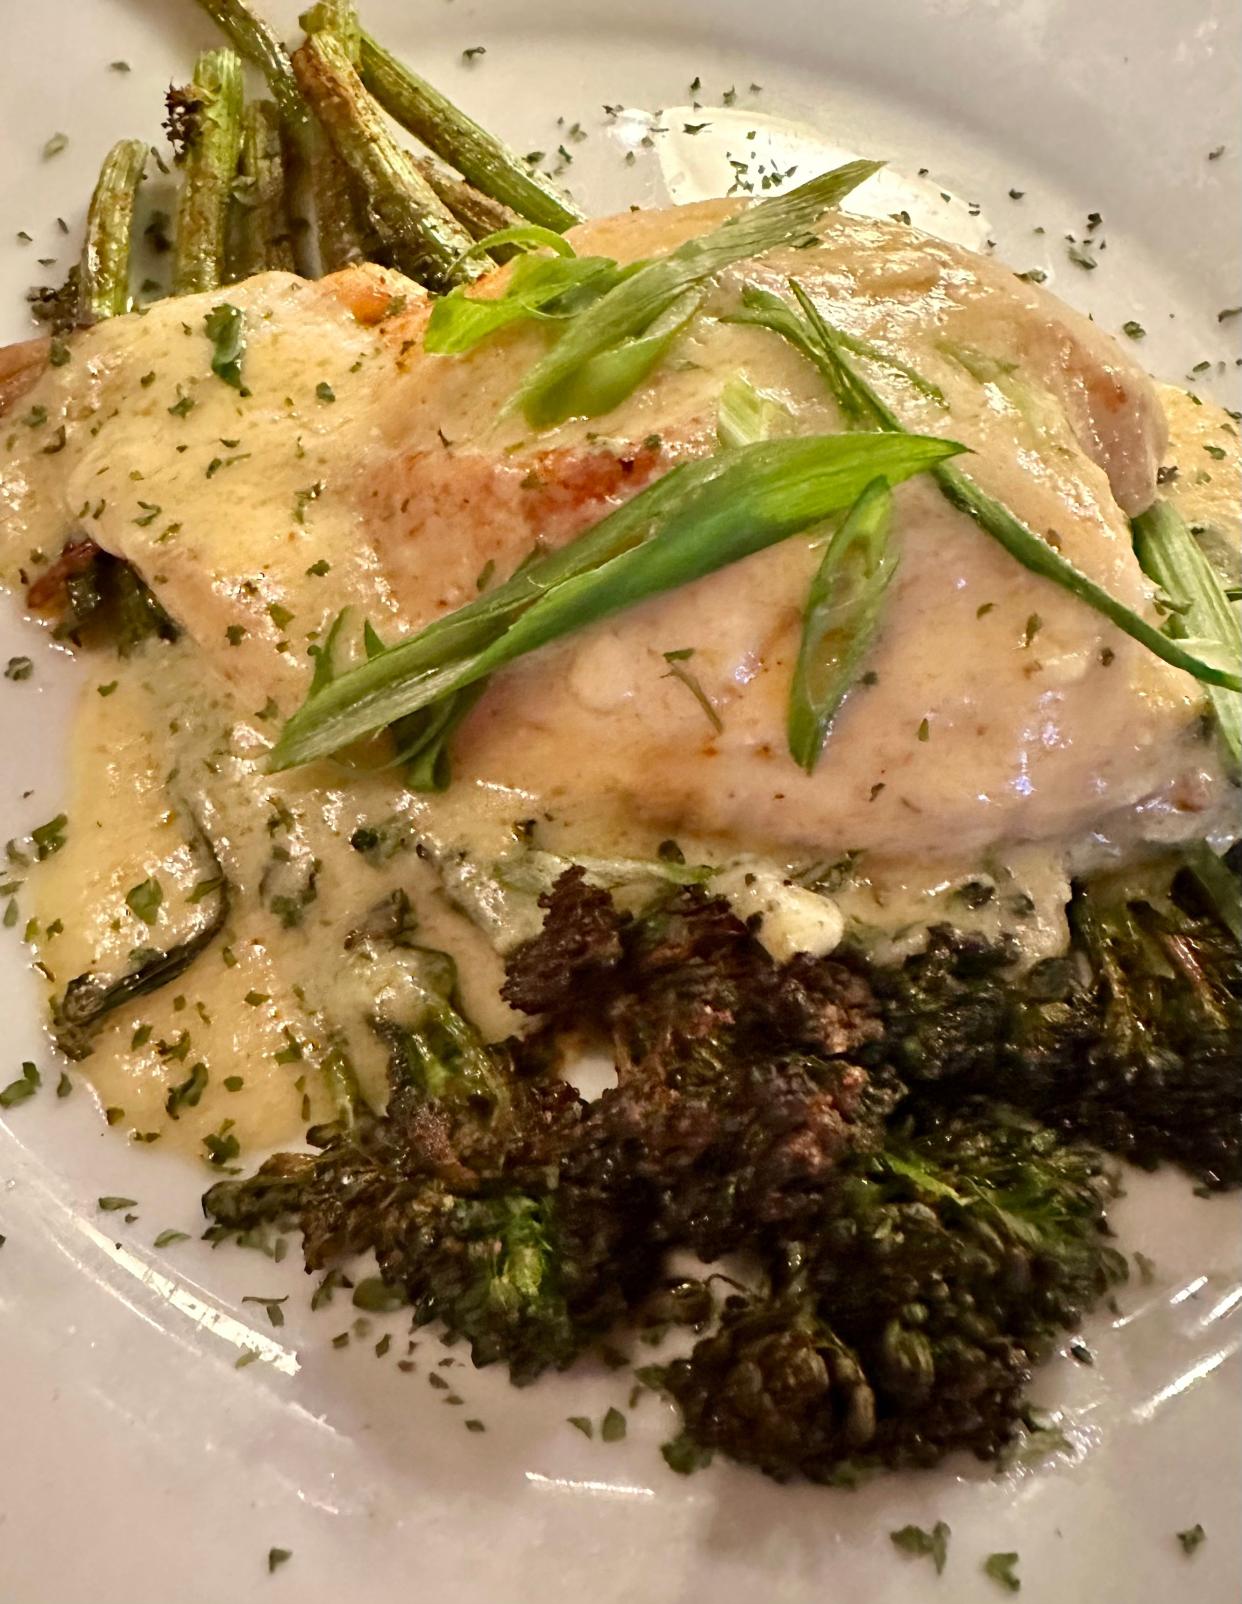 One of chef Herman's signature specials, the delicate flavors of crab stuffed flounder shine through with a tarragon béarnaise sauce and some broccolini on the side.